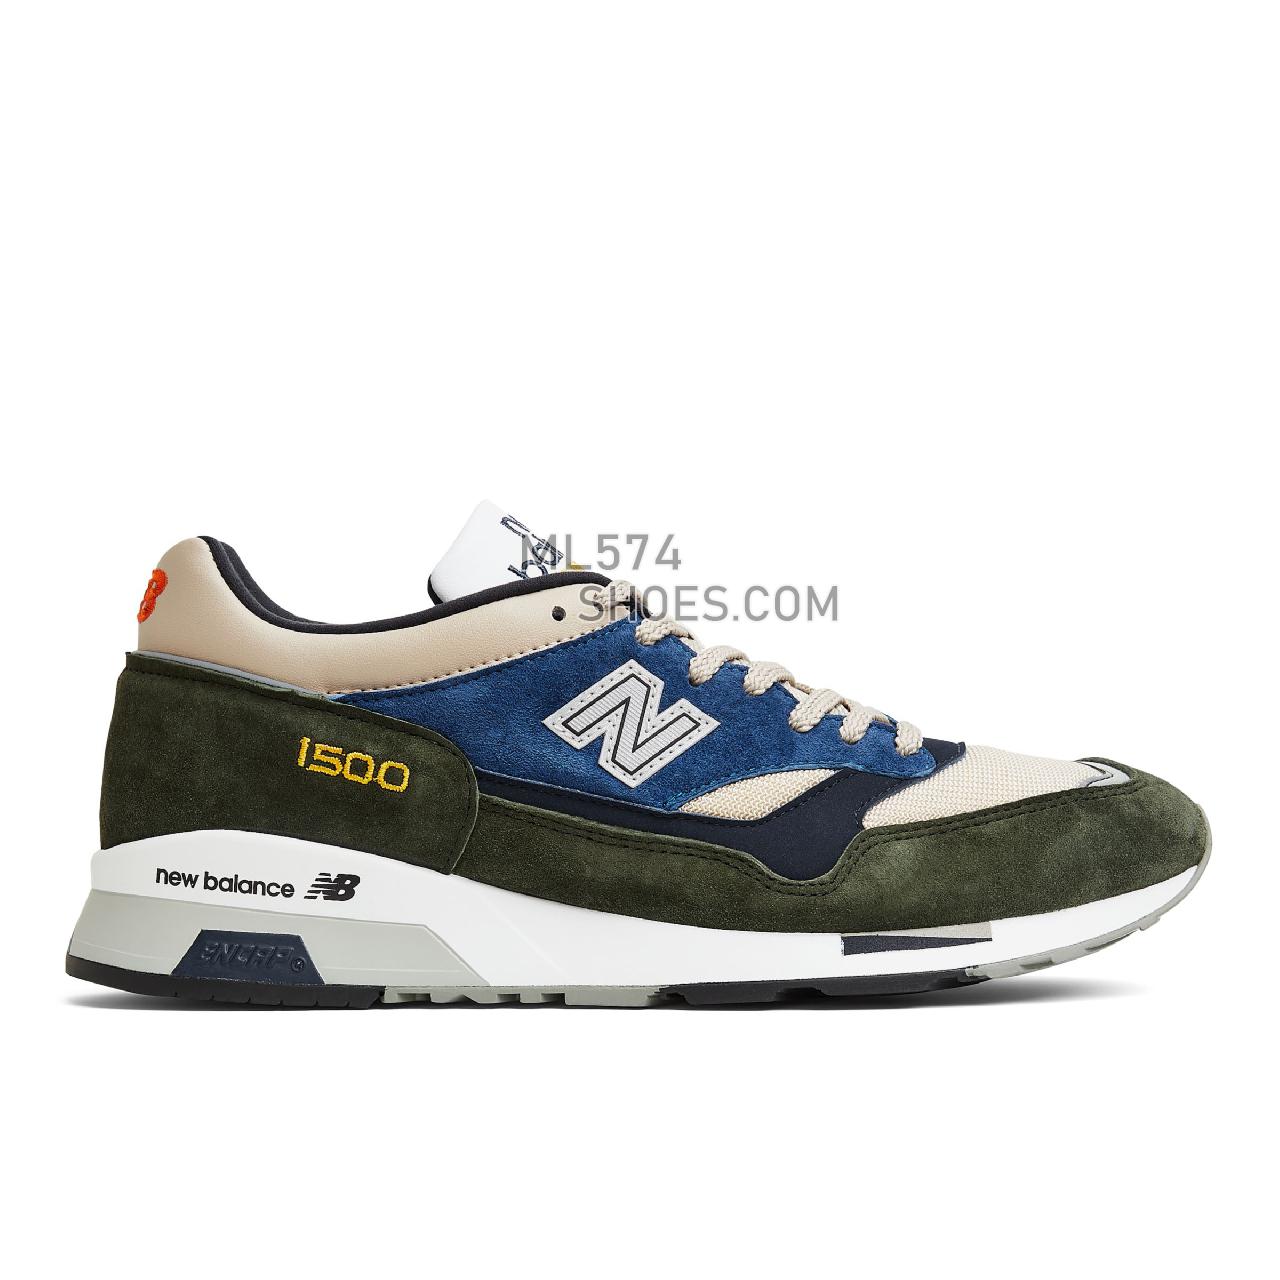 New Balance Made in UK 1500 - Men's Made in USA And UK Sneakers - Khaki with sand and blue - M1500UPG